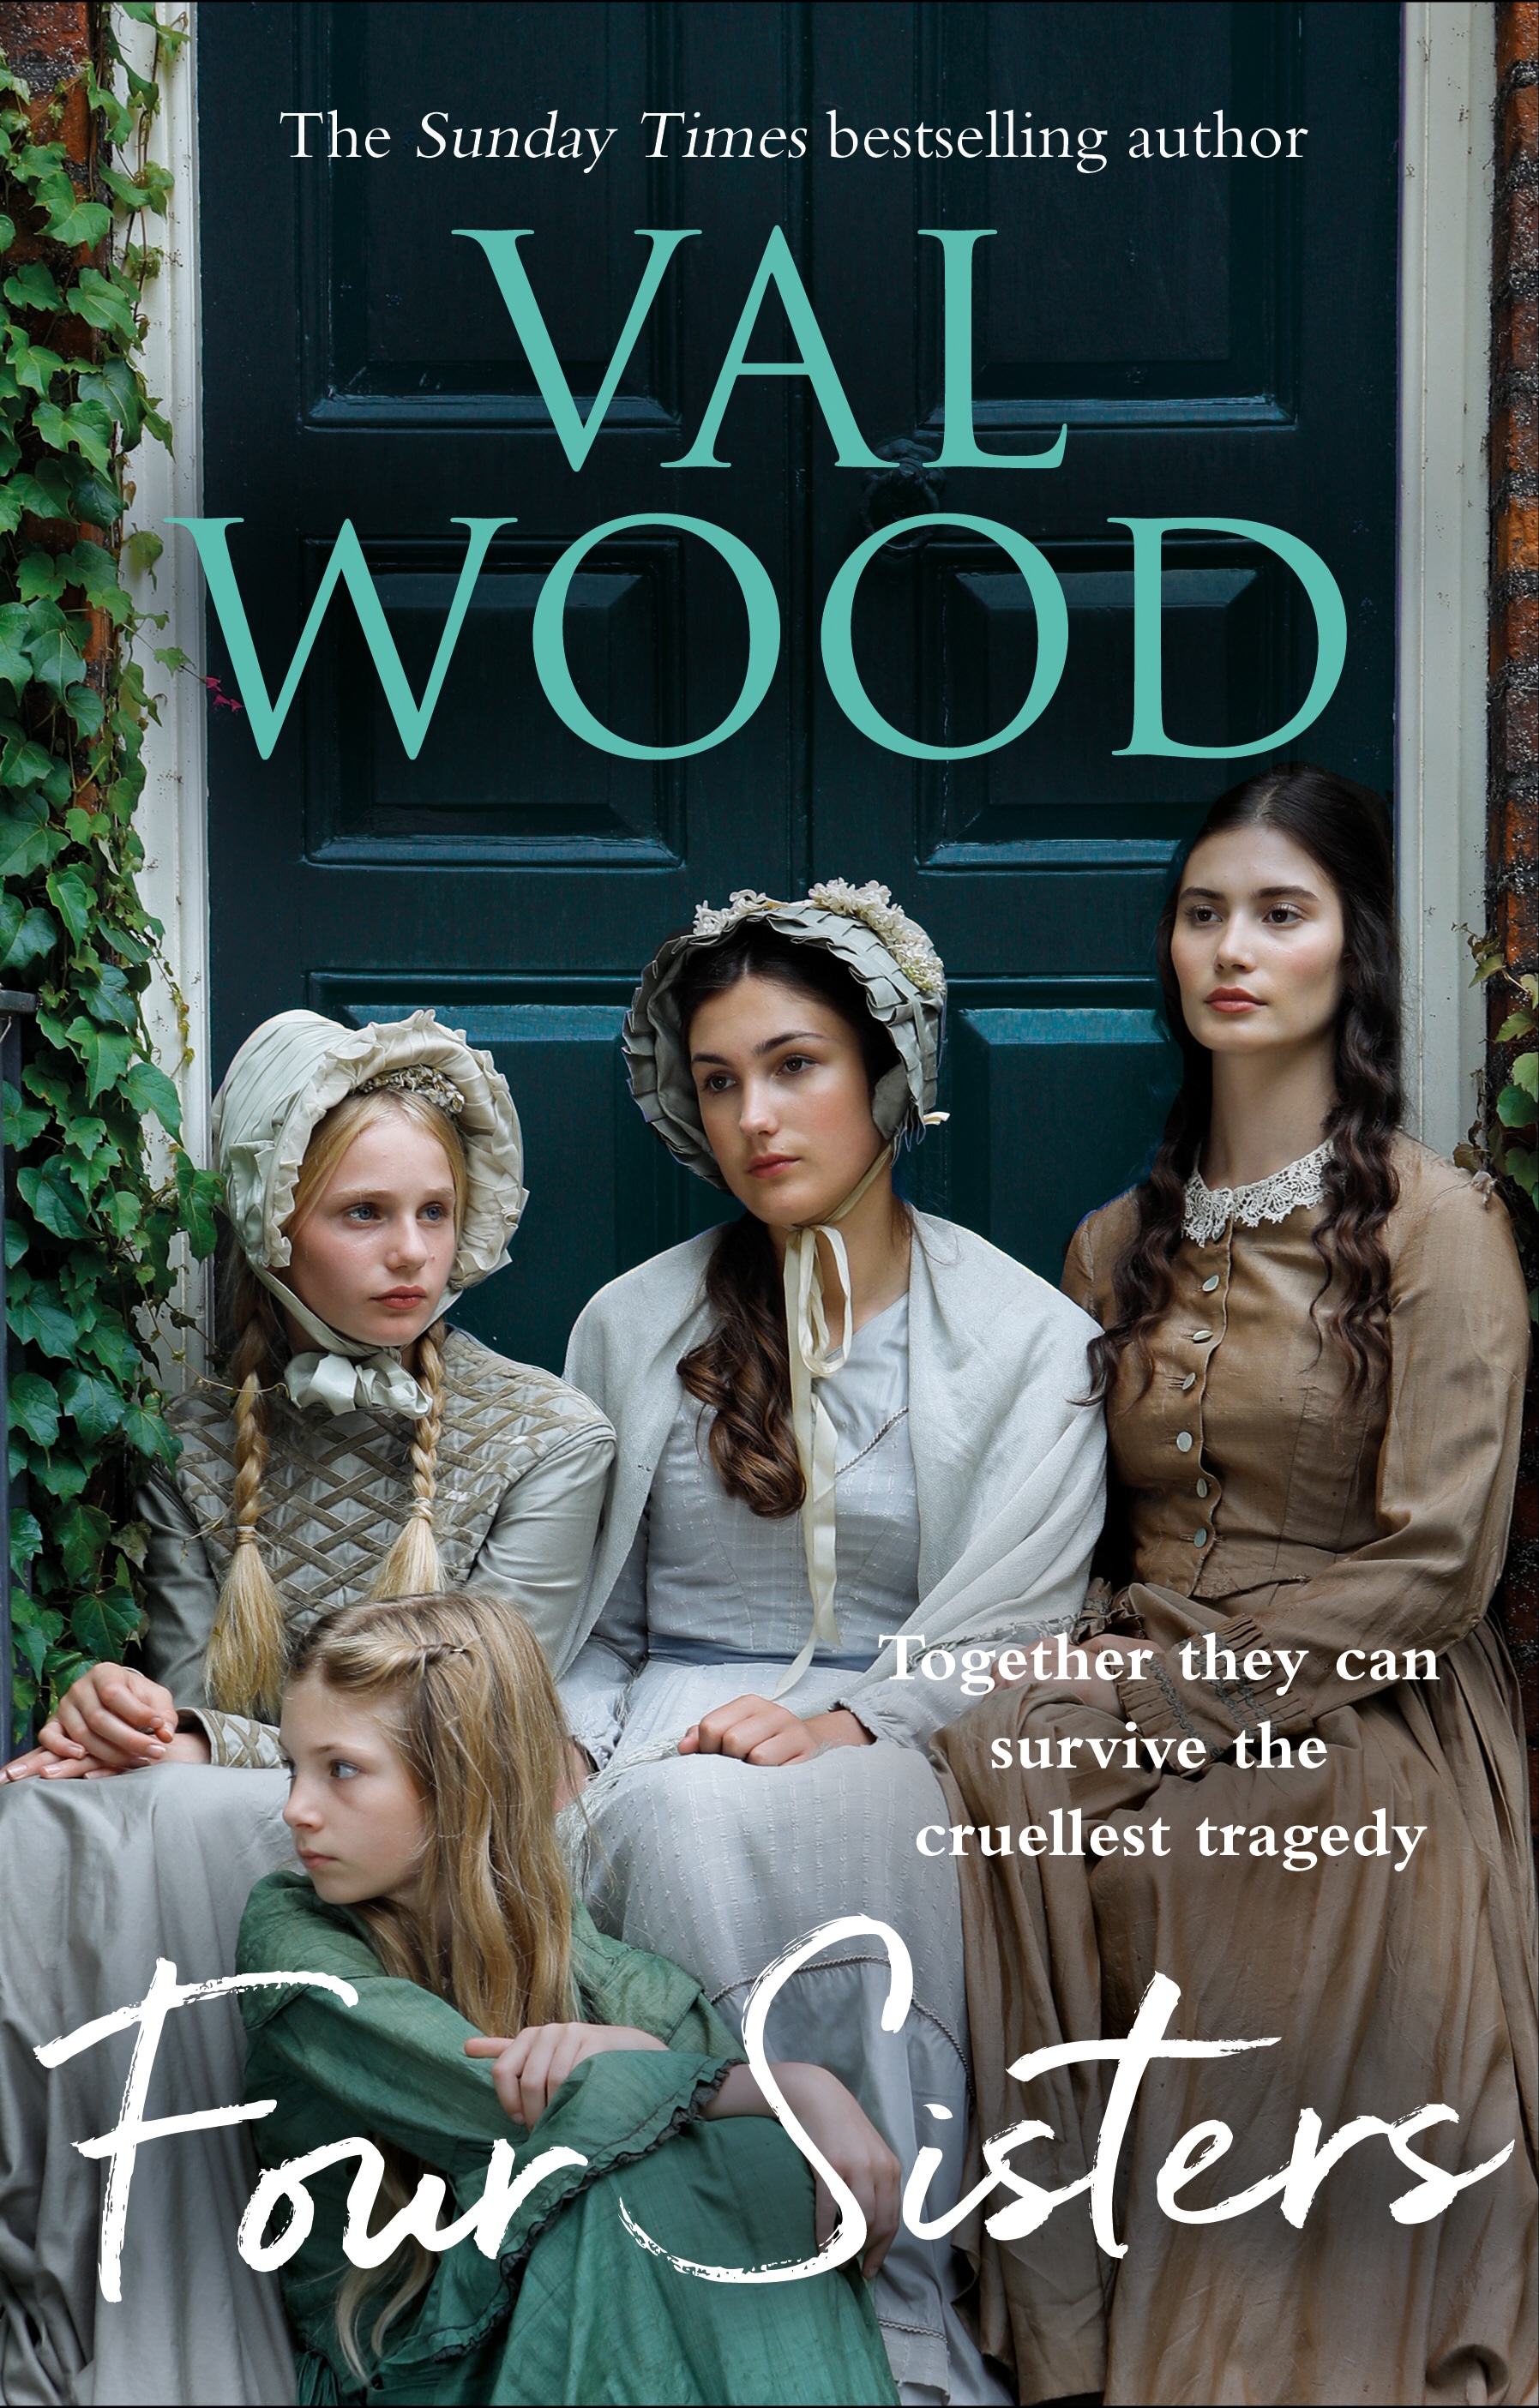 Book “Four Sisters” by Val Wood — January 23, 2020